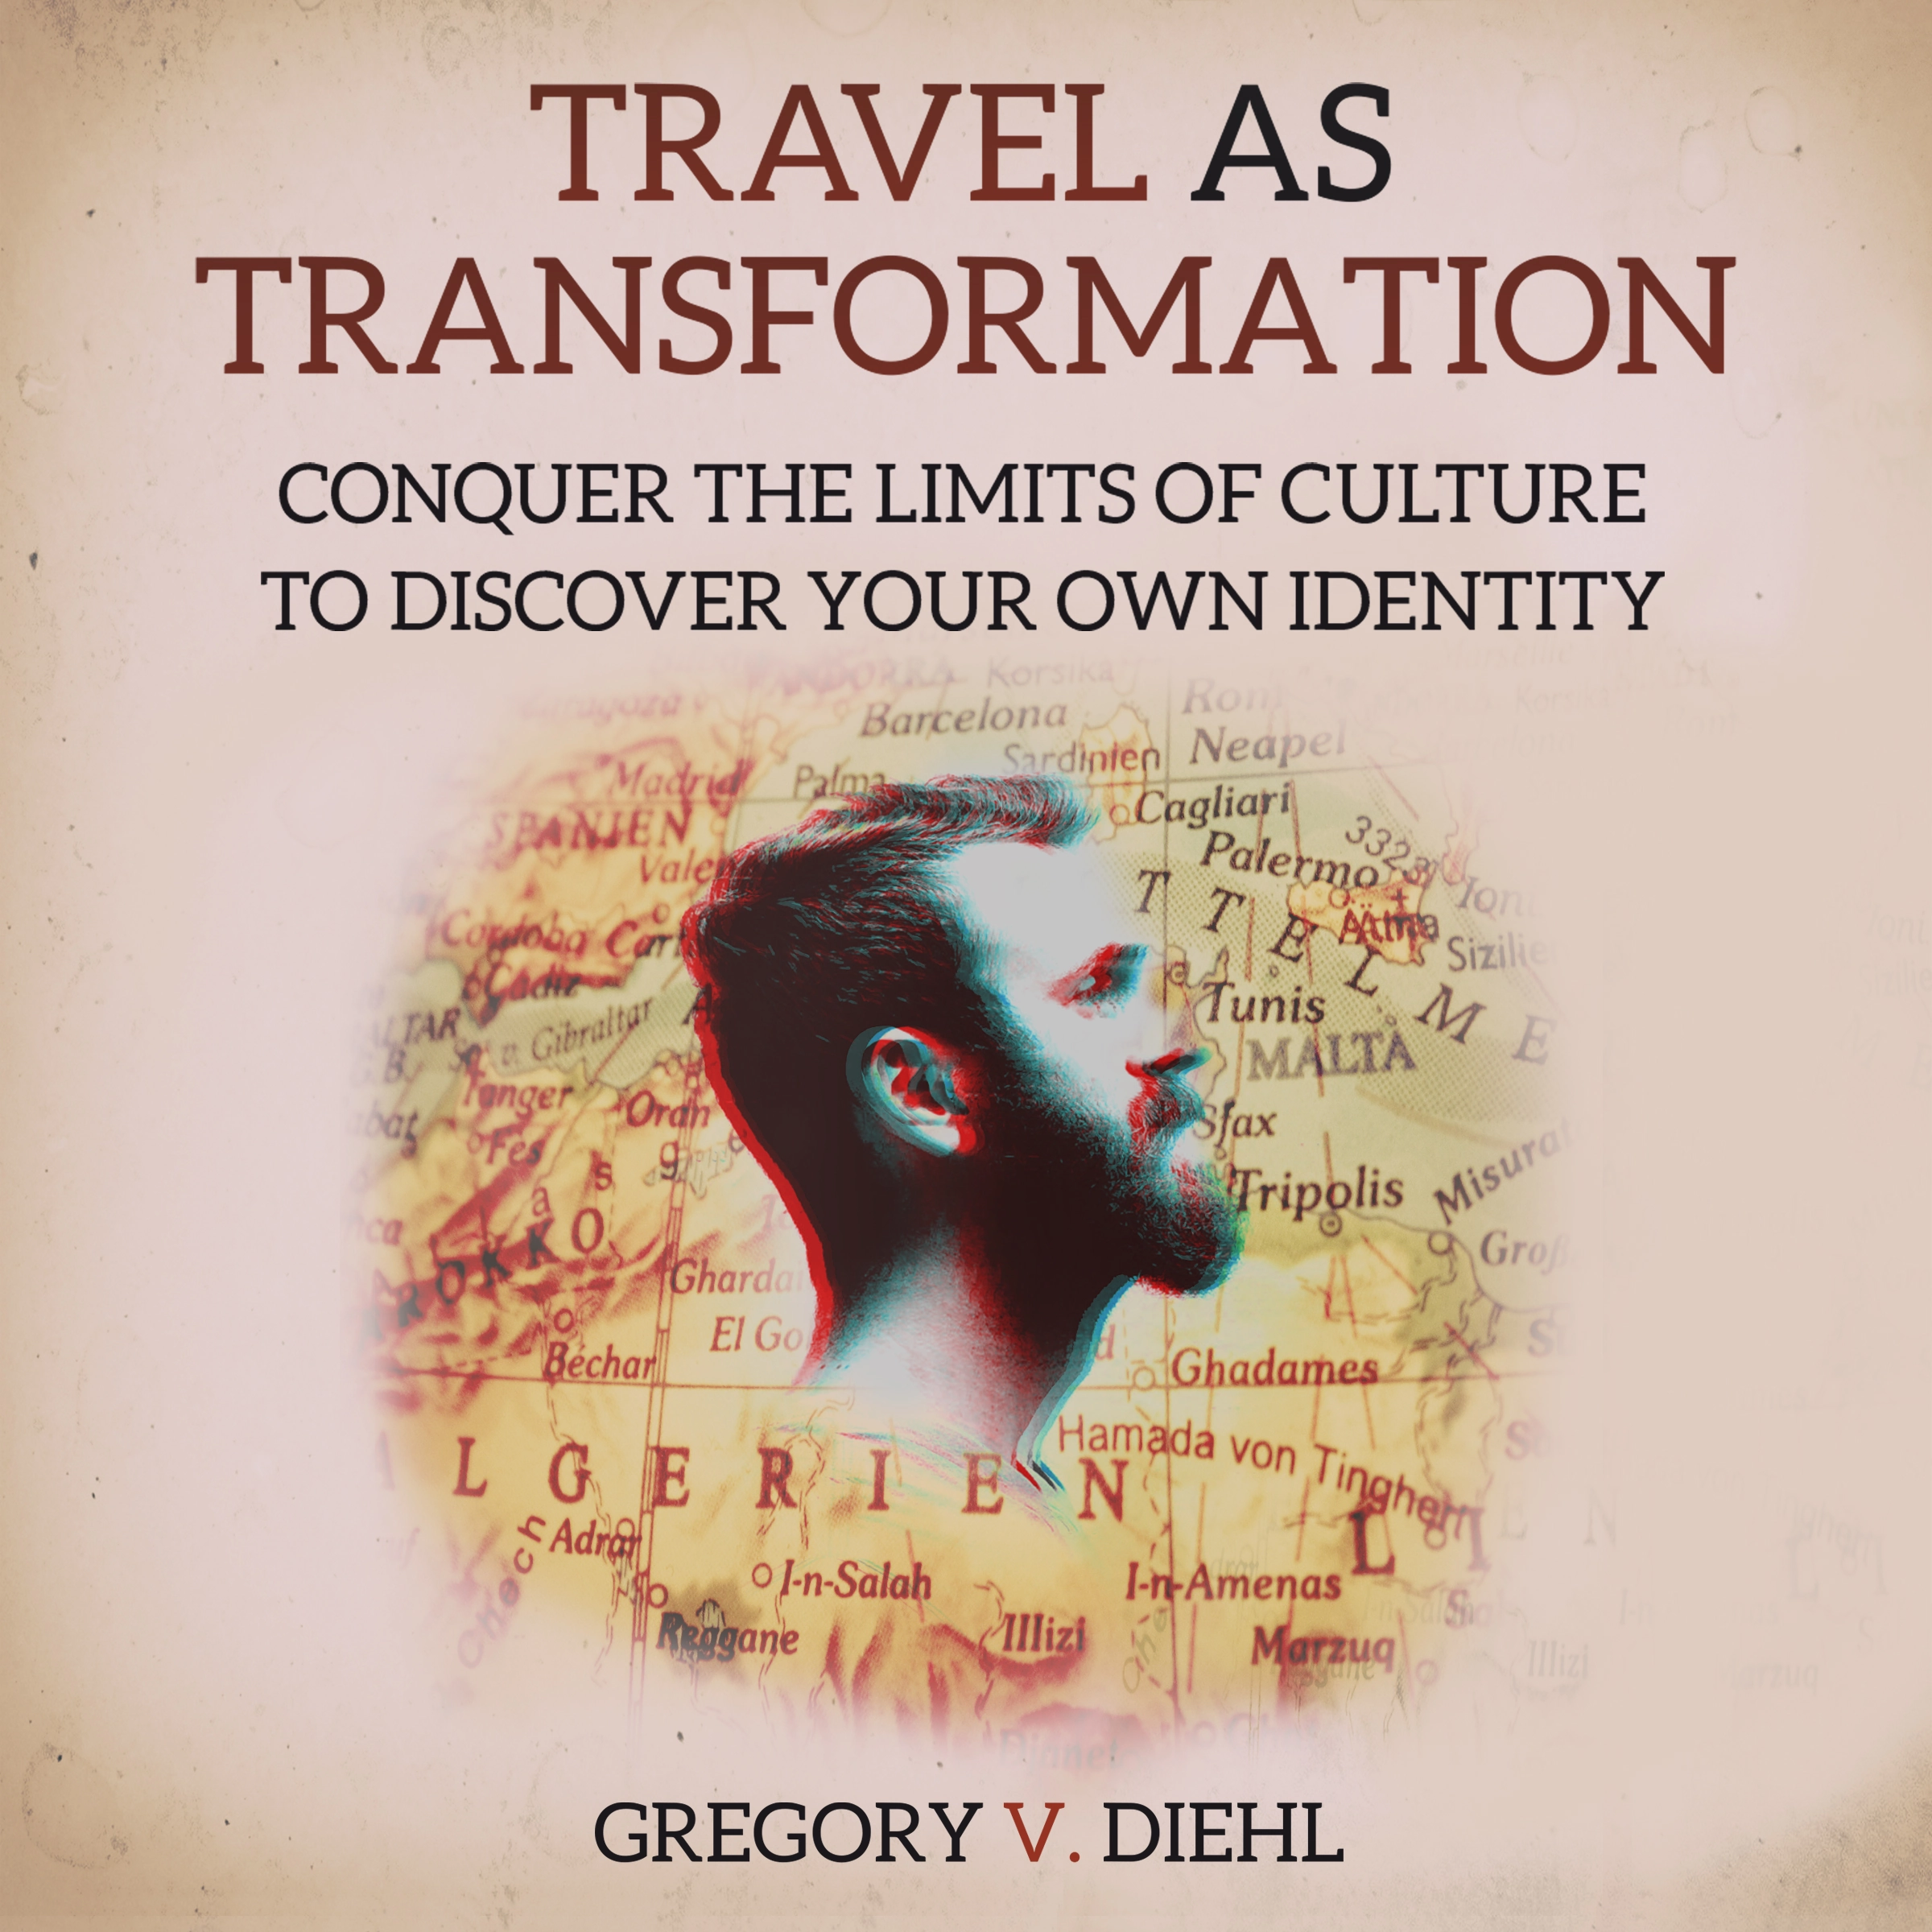 Travel As Transformation: Conquer the Limits of Culture to Discover Your Own Identity Audiobook by Gregory V. Diehl